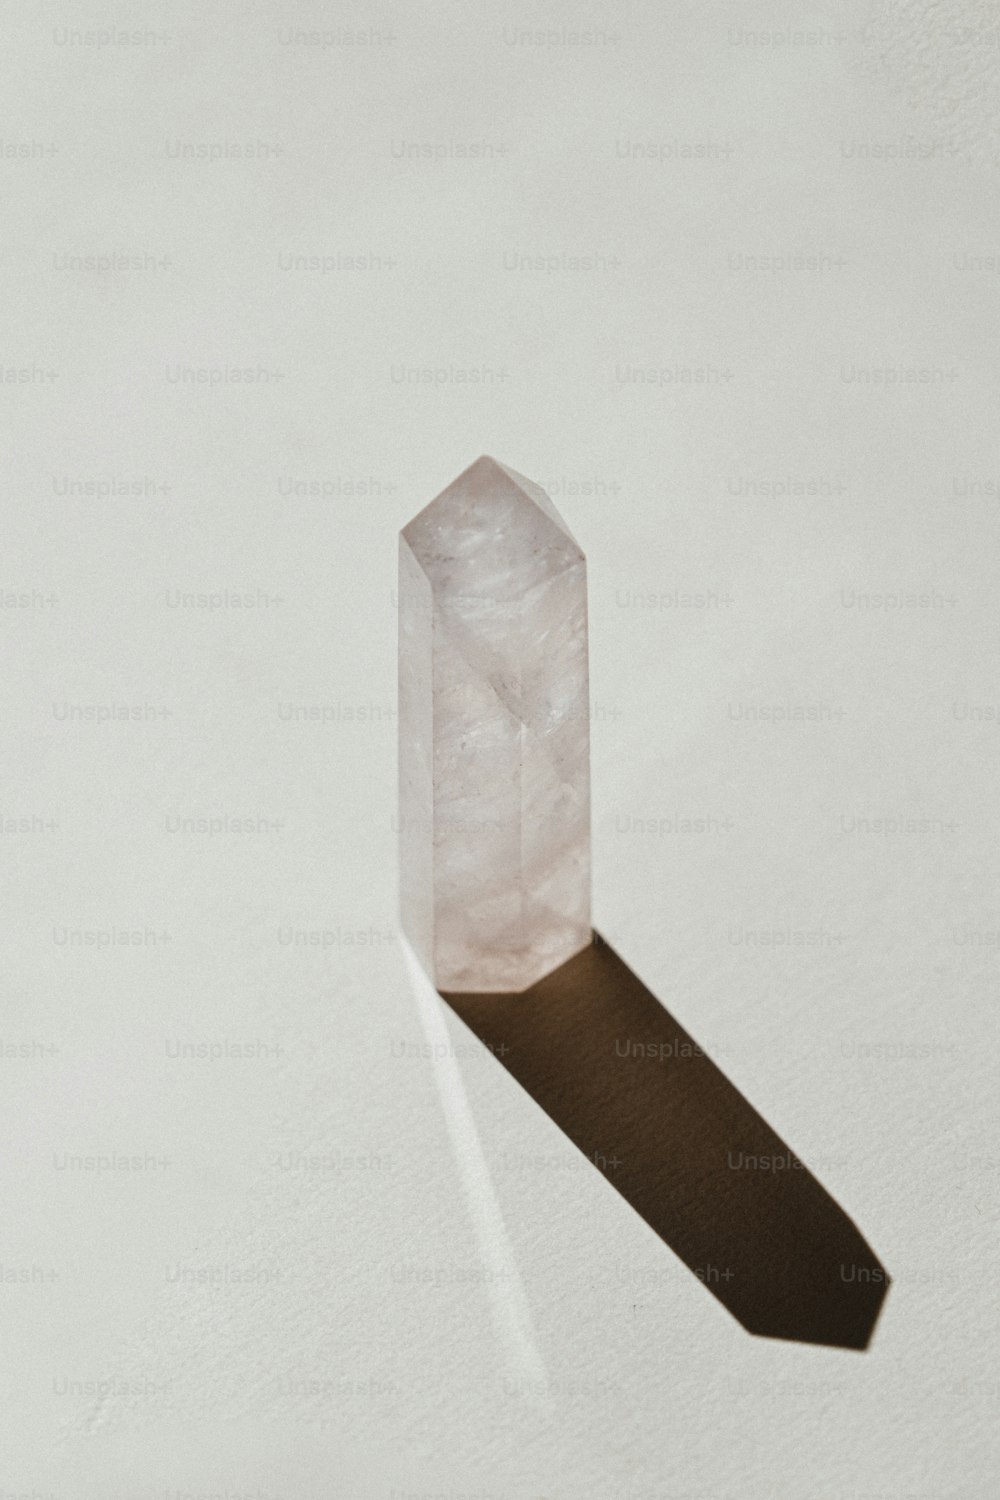 a single crystal on a white surface with a long shadow